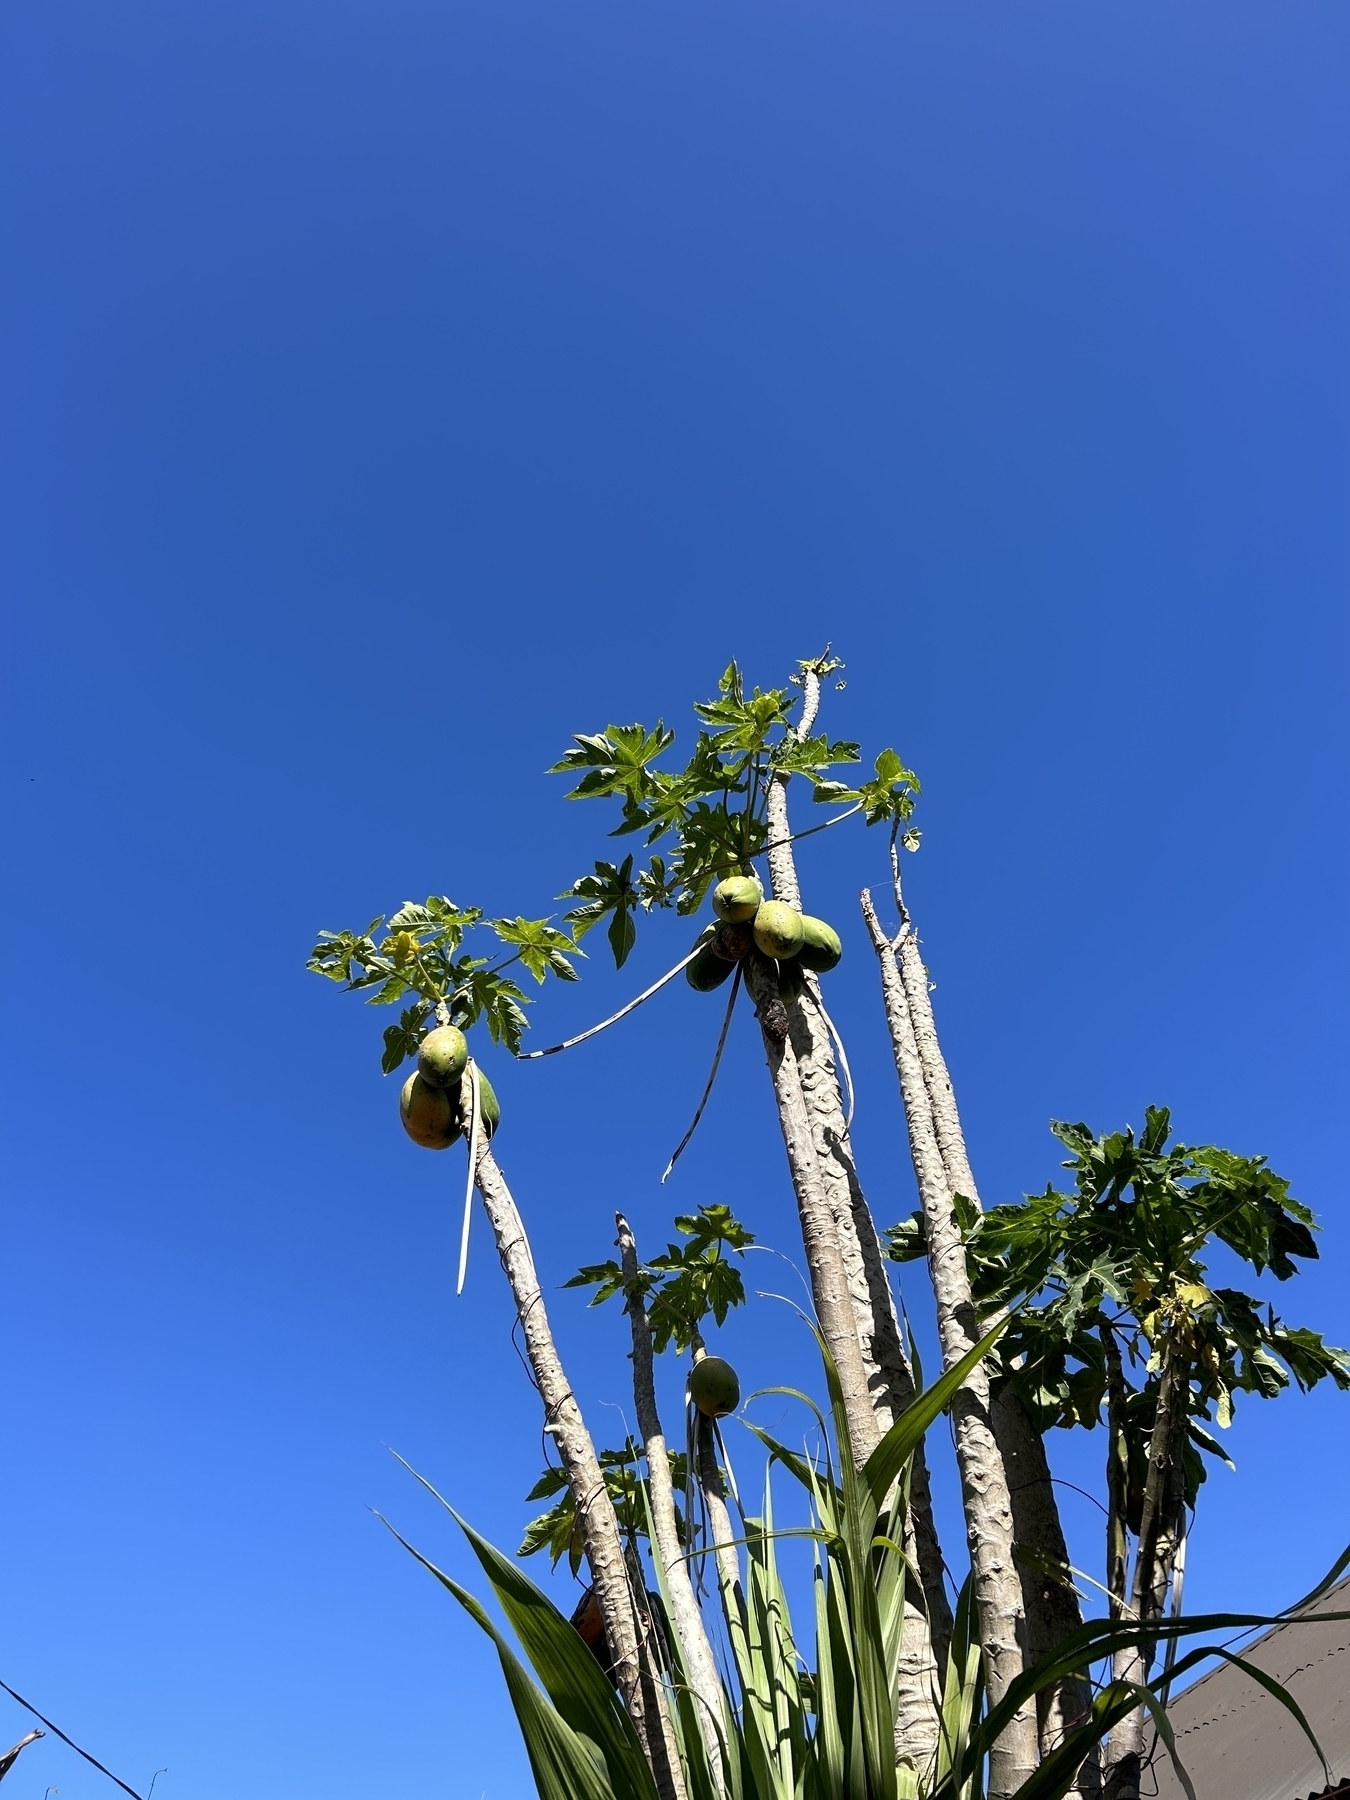 Some pawpaws on a tree, blue sky in background. 